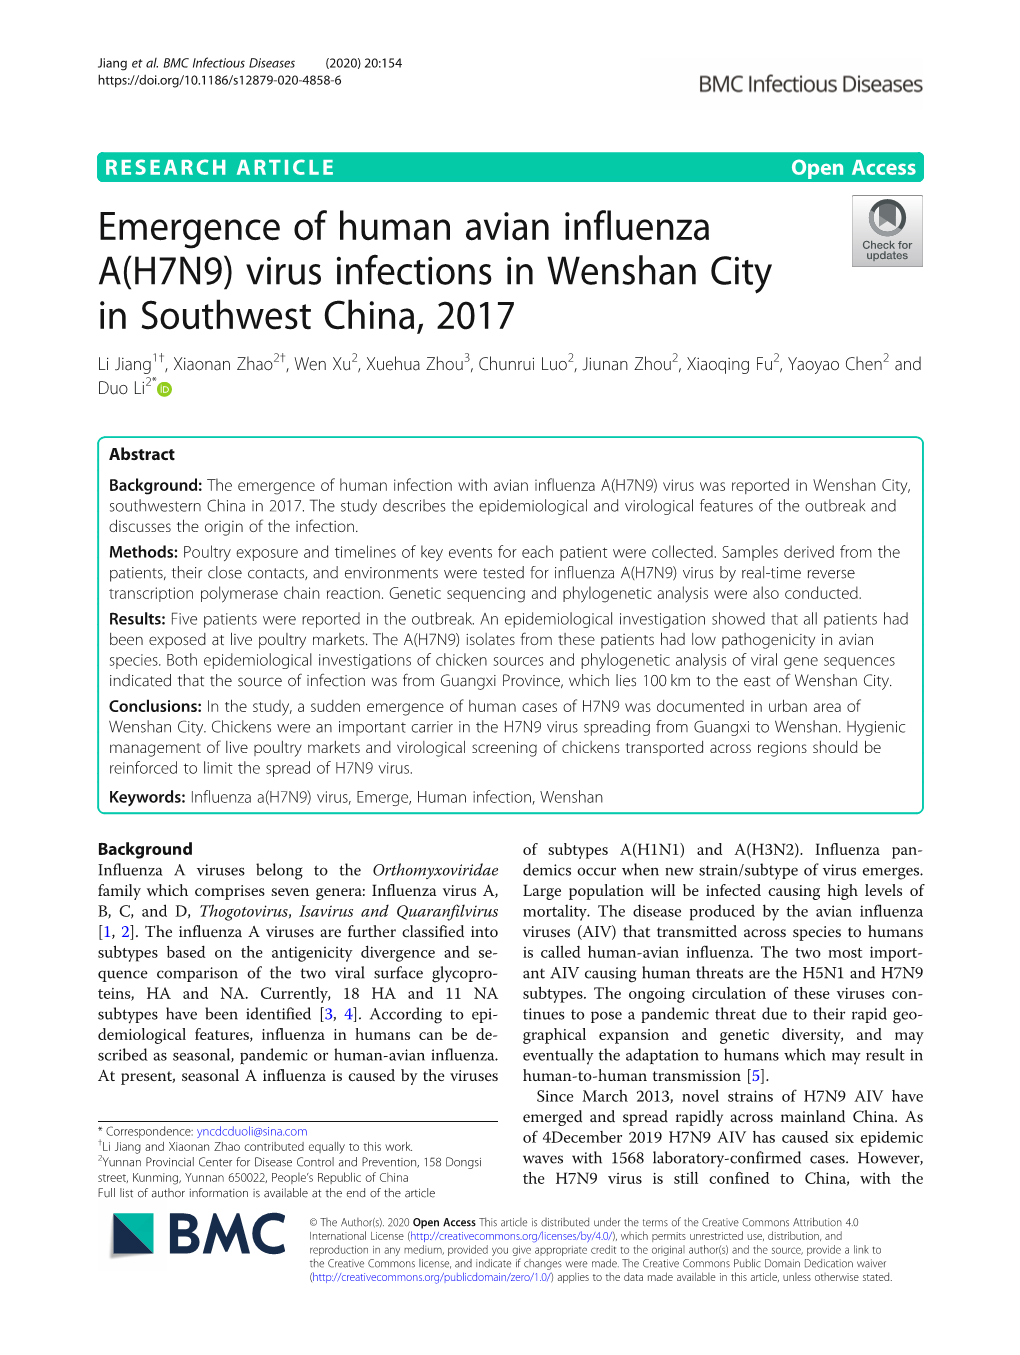 Emergence of Human Avian Influenza A(H7N9) Virus Infections In